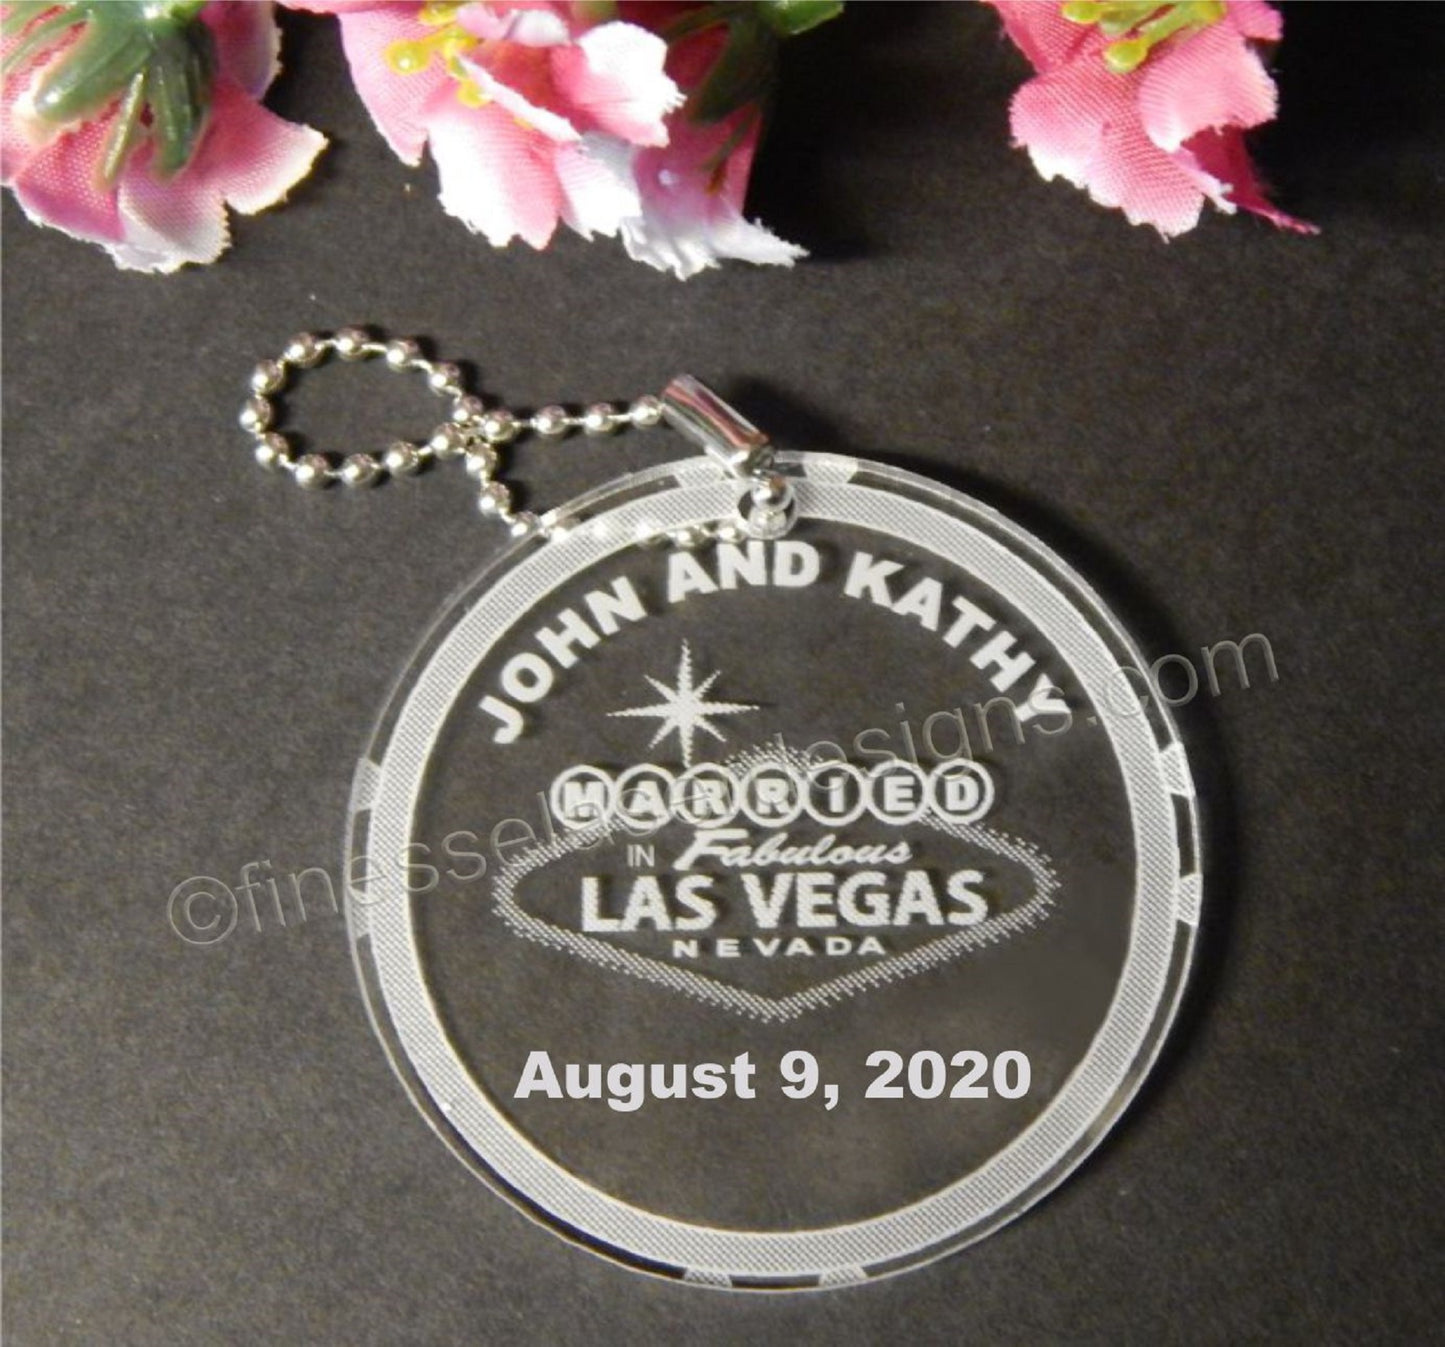 Acrylic keychain favor designed with Married in Las Vegas sign inside a poker chip along with names and date